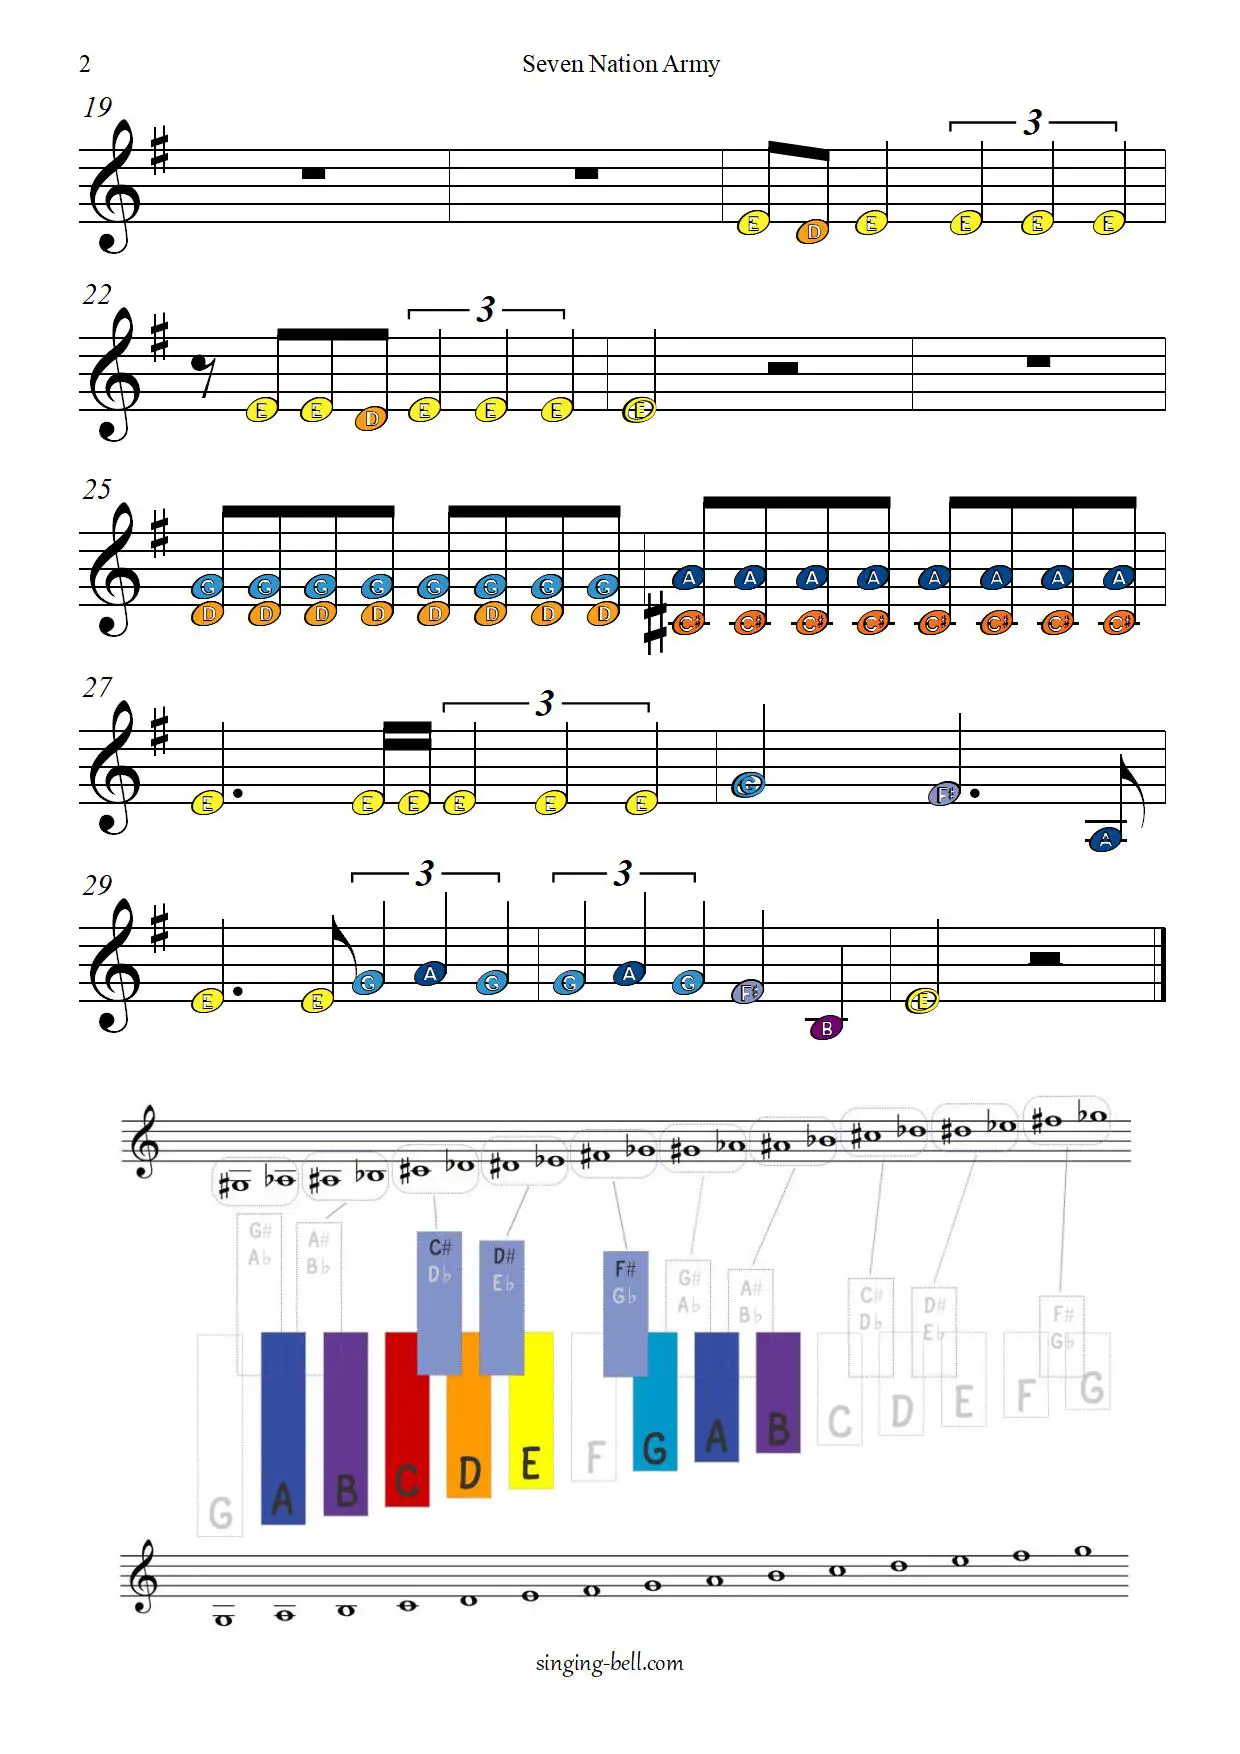 Seven Nation Army free xylophone glockenspiel sheet music color notes chart pdf page-2